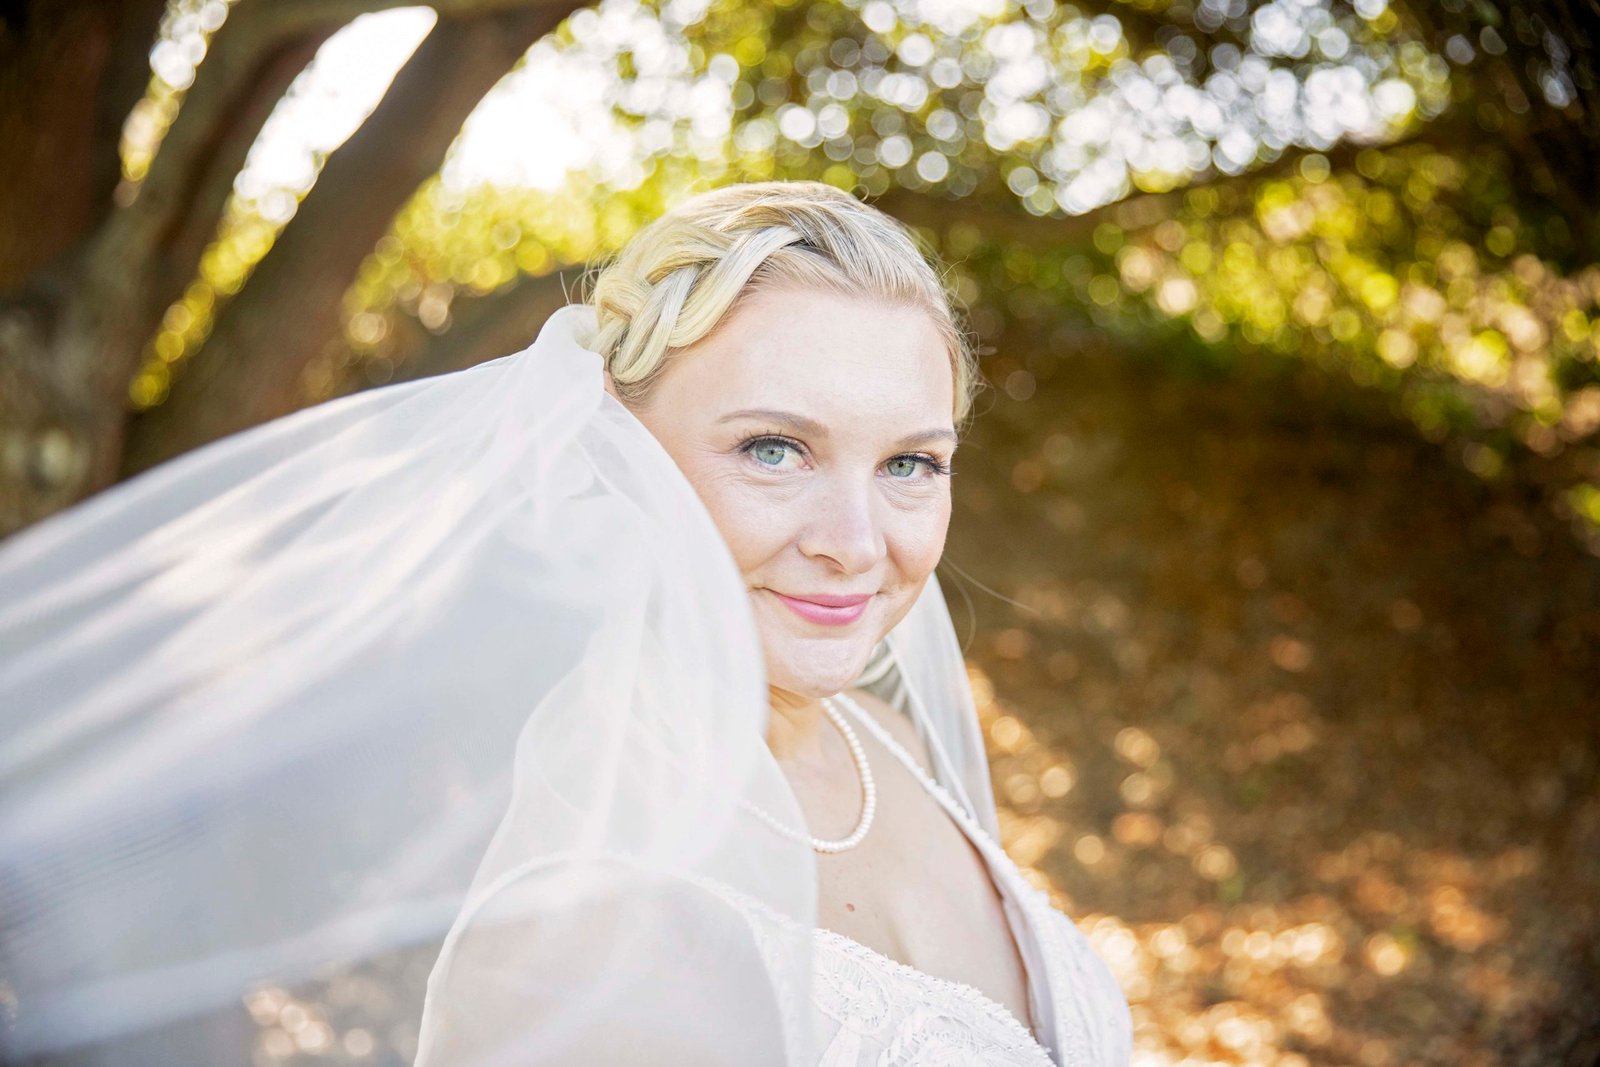 bride looking at the camera with her veil in the foreground